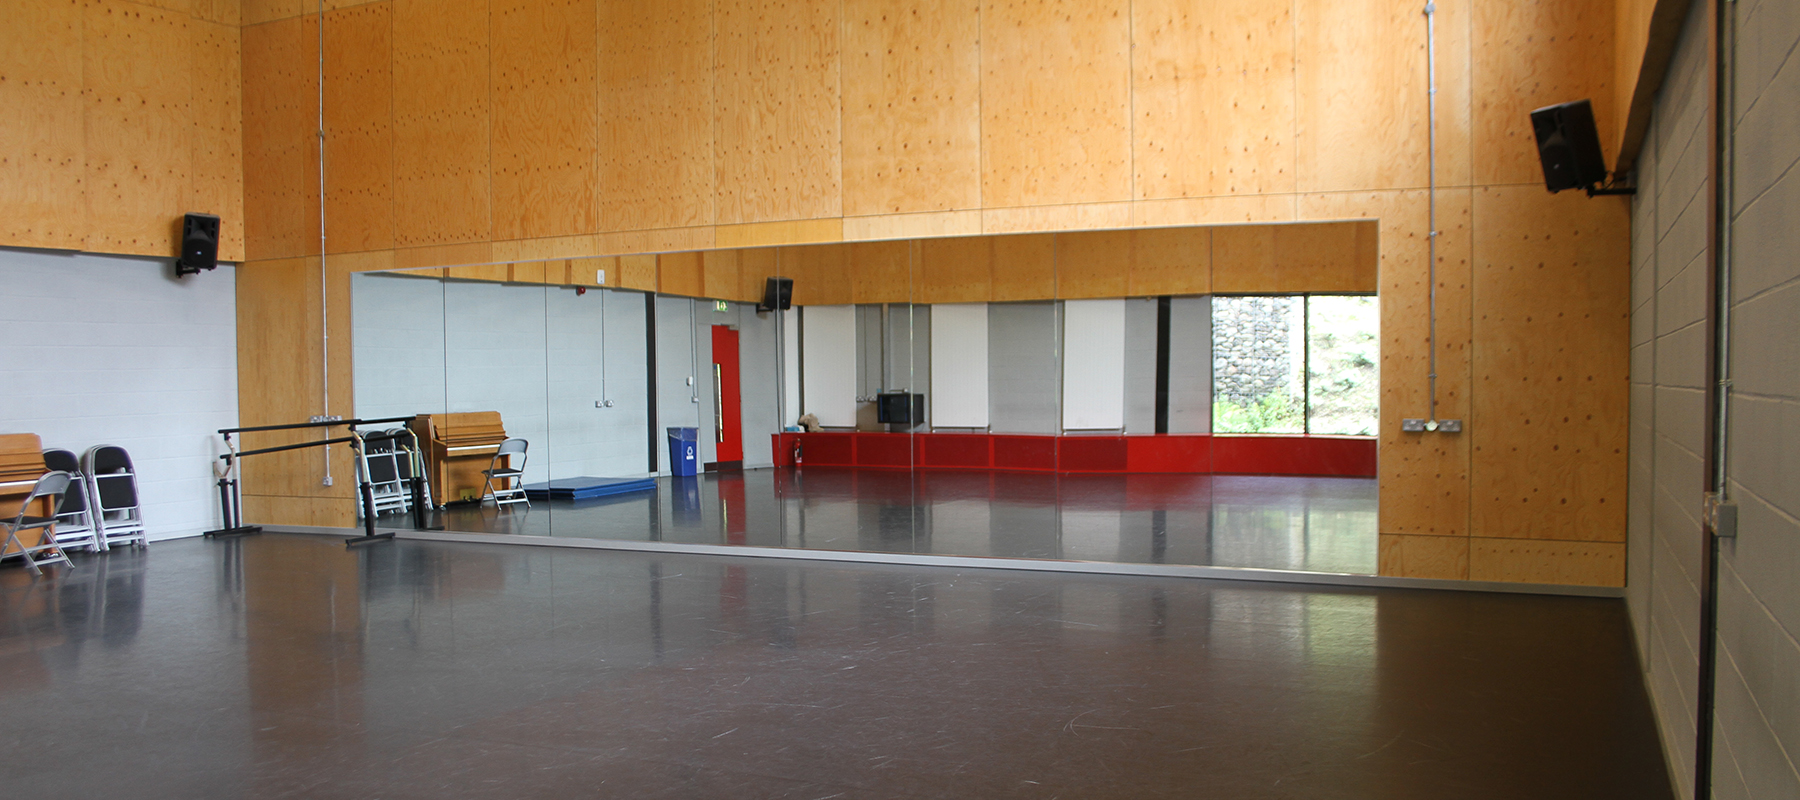 University of Winchester dance studio with mirrors